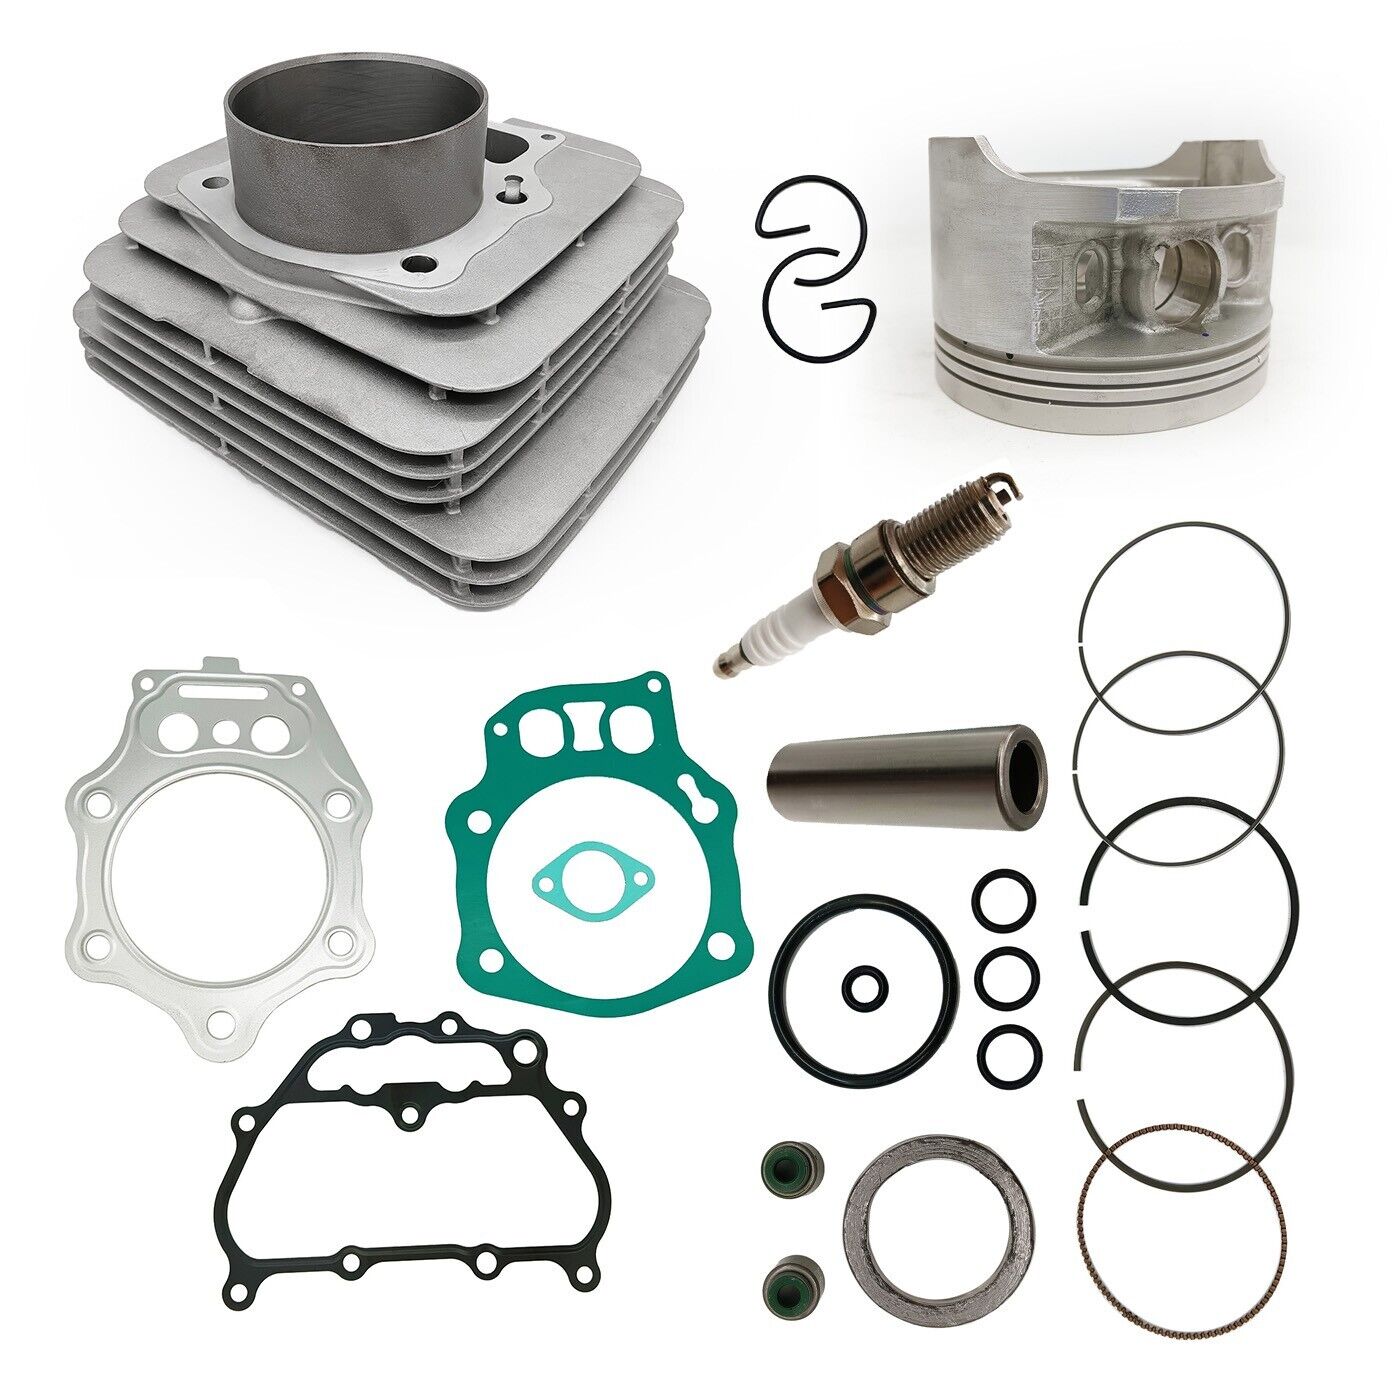 Top End Kit Cylinder Piston Rings Replacement for Honda Foreman 500 TRX500 92mm